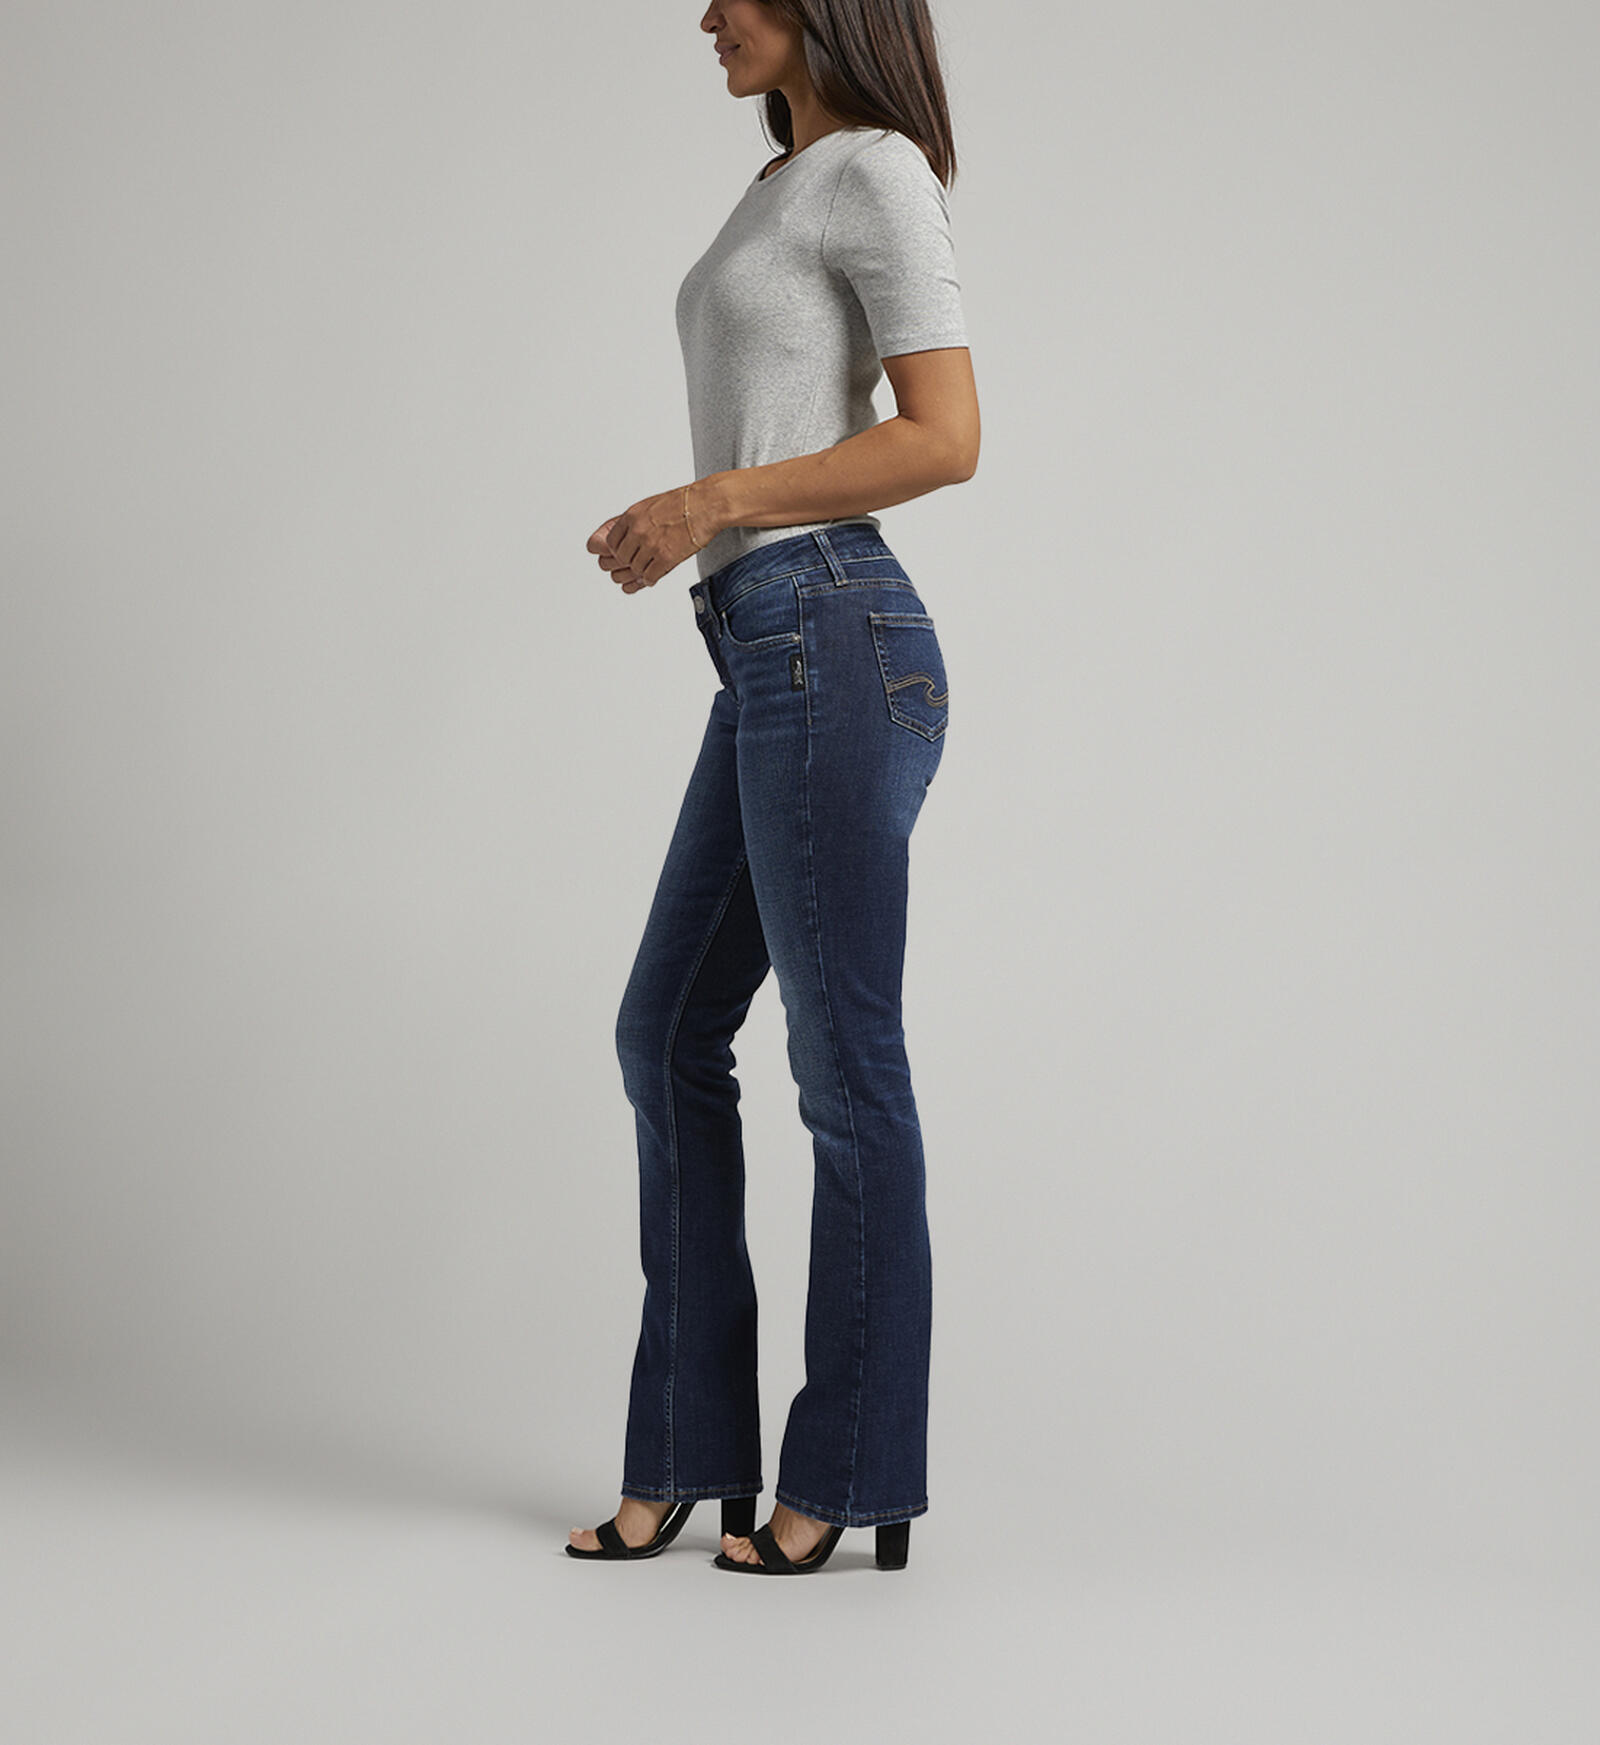 Buy Suki Mid Rise Bootcut Jeans Plus Size for USD 88.00